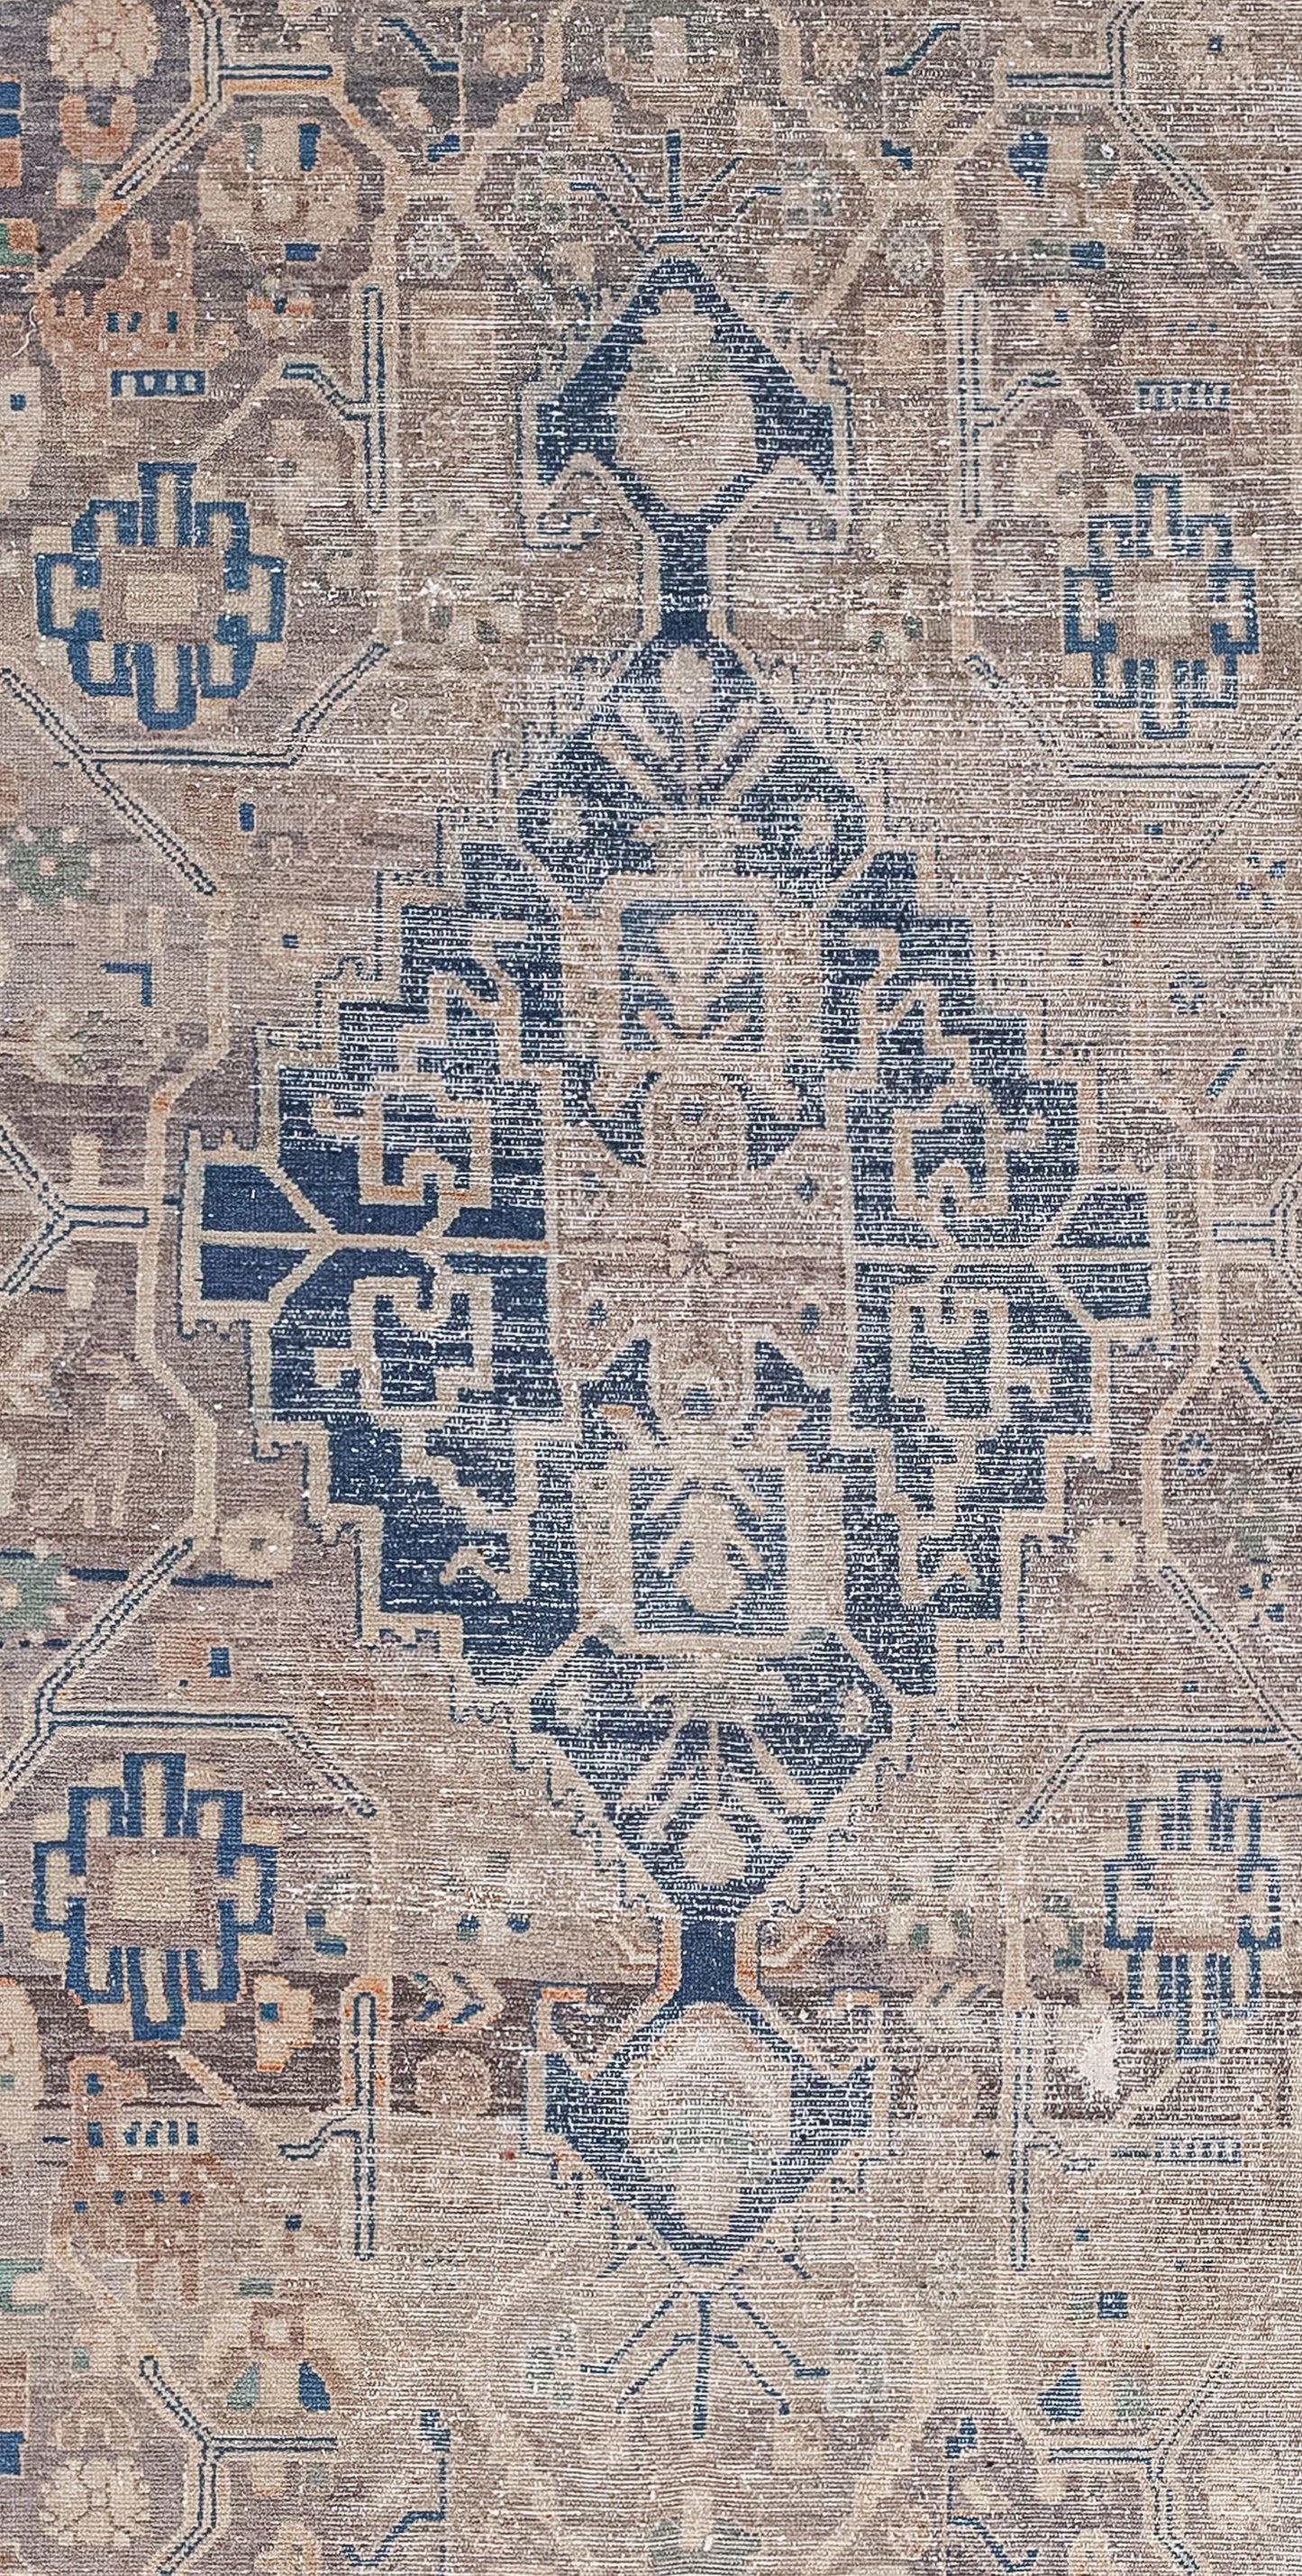 The center of the mat features a circuit-filled diamond and two fused arrows at the top and bottom.